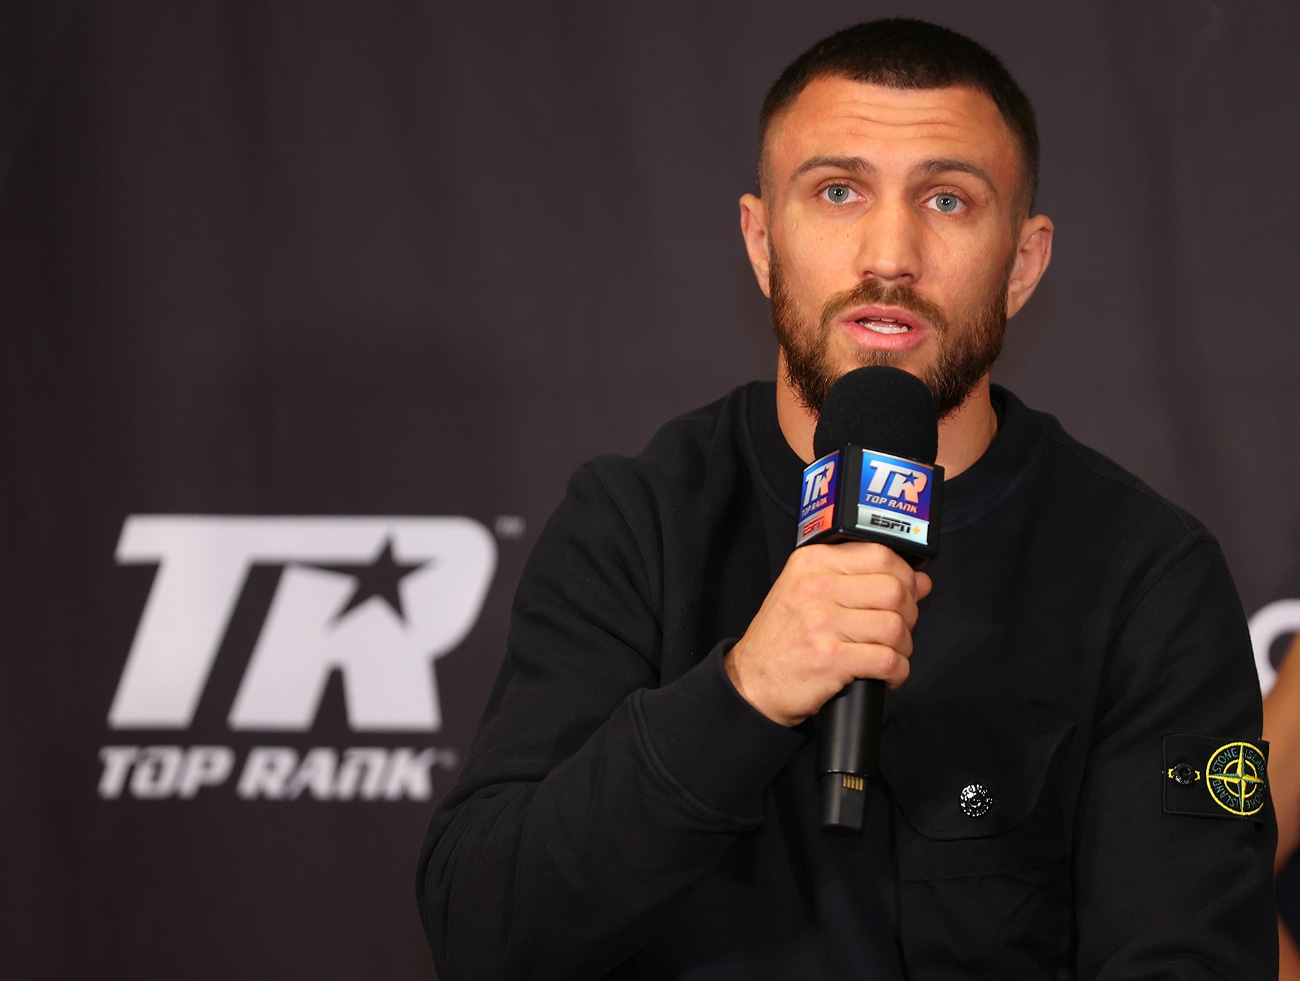 Image: Vasyl Lomachenko told Top Rank he's ready to fight by October